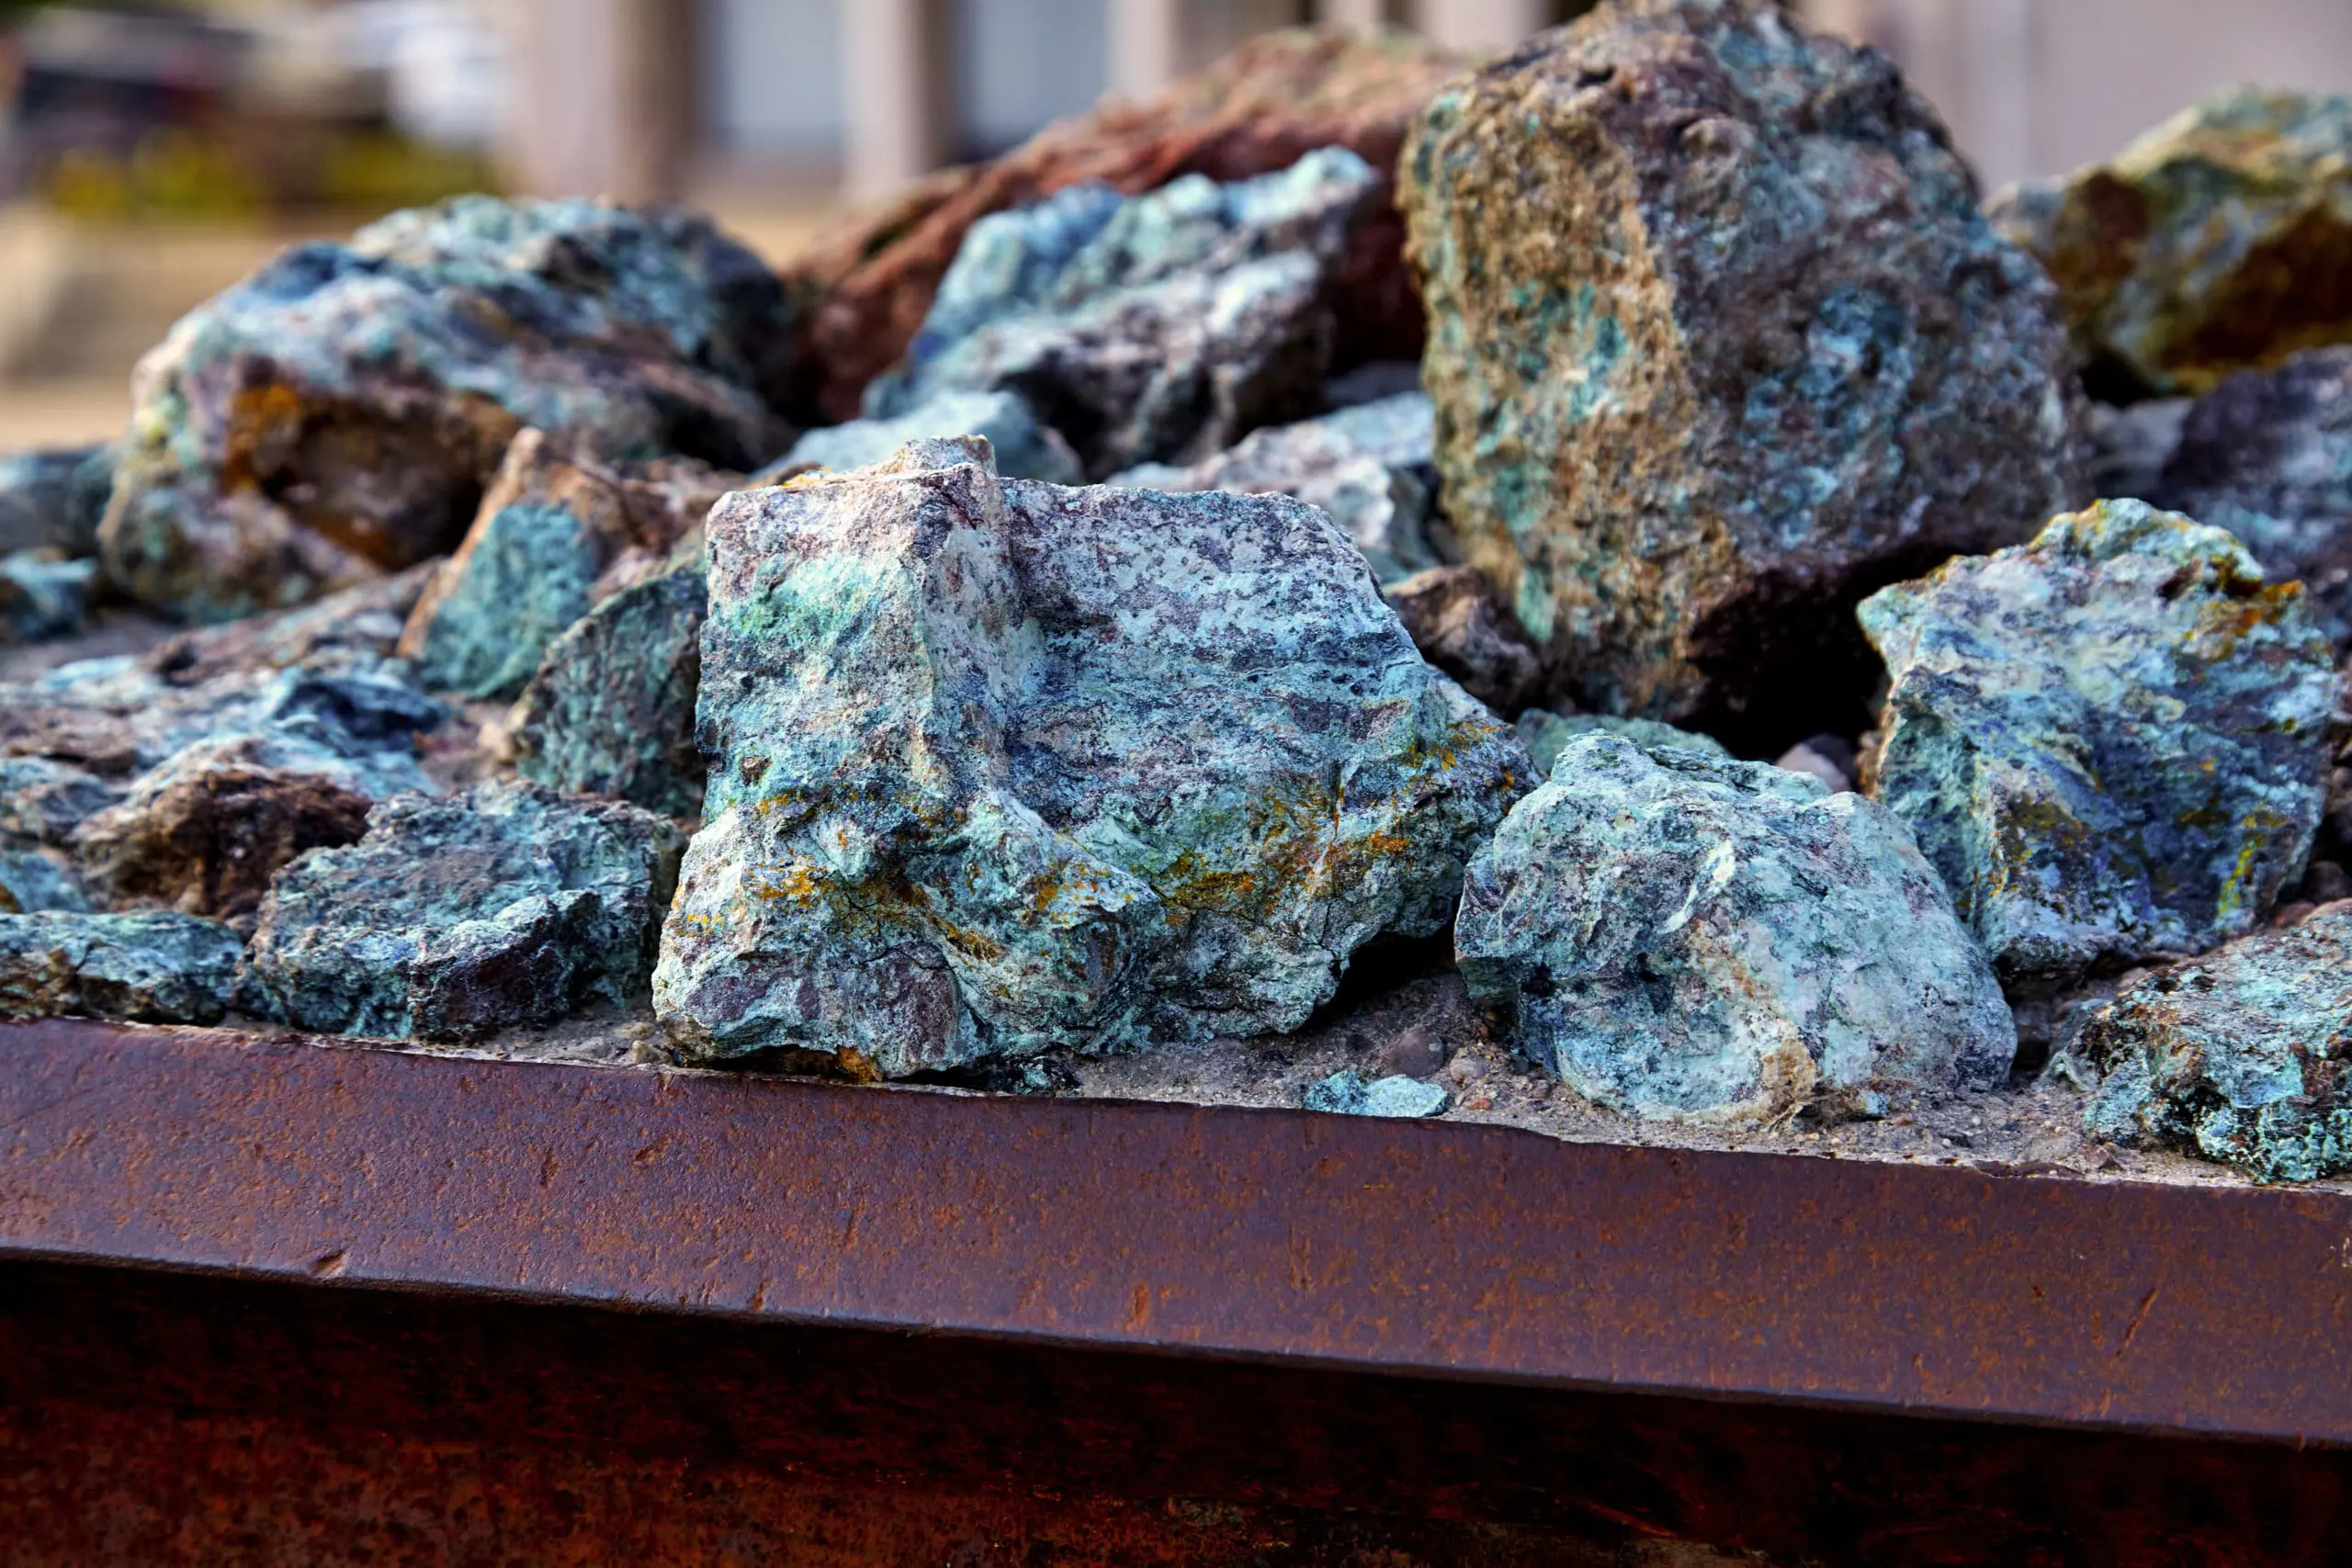 MVI excels at identifying copper porphyry-related intrusives